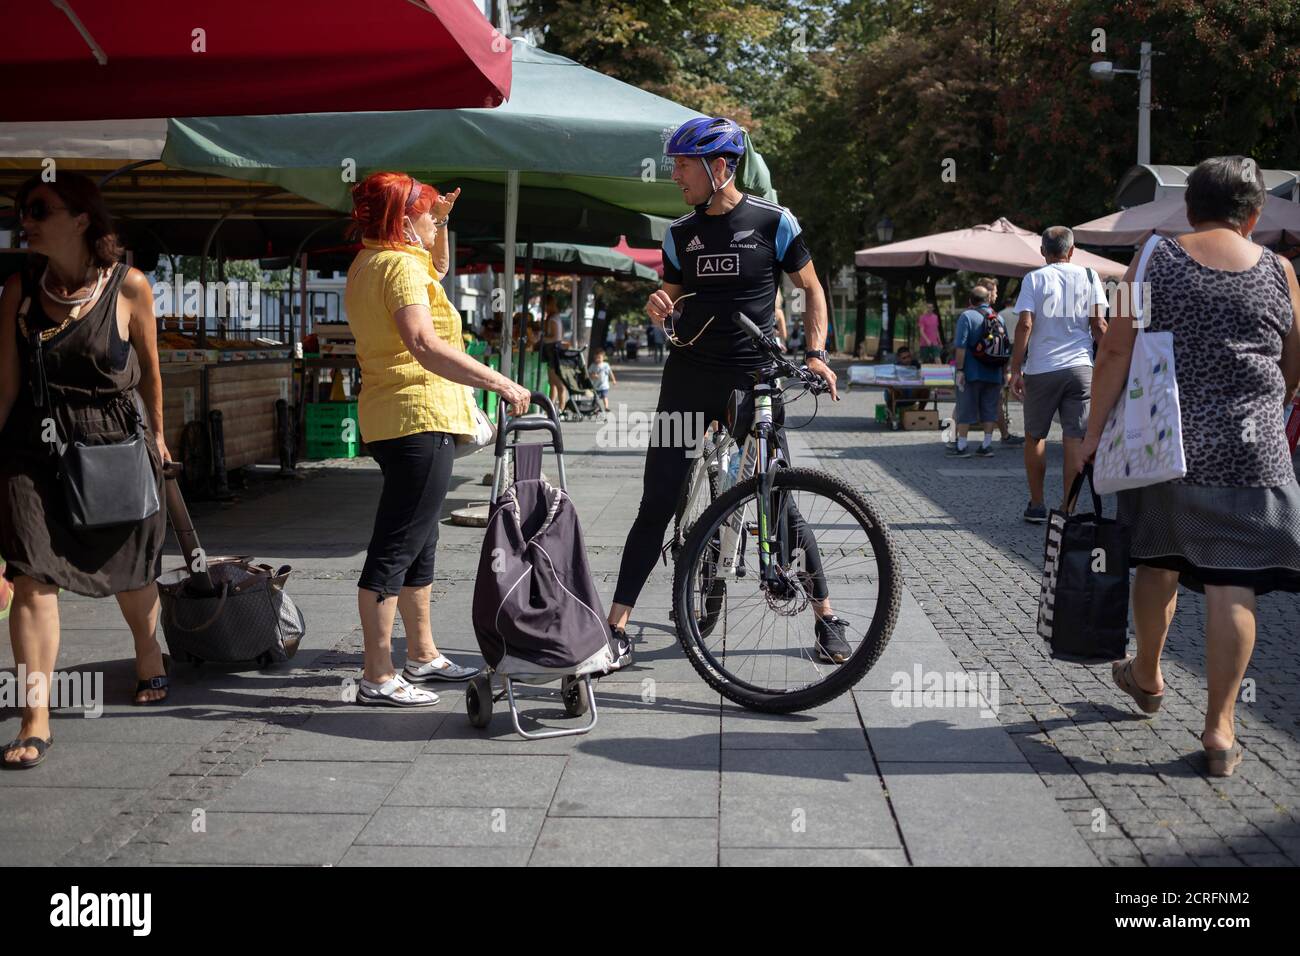 Belgrade, Serbia, Sep 17, 2020: Street scene with a woman chatting with cyclist at farmer’s market Stock Photo